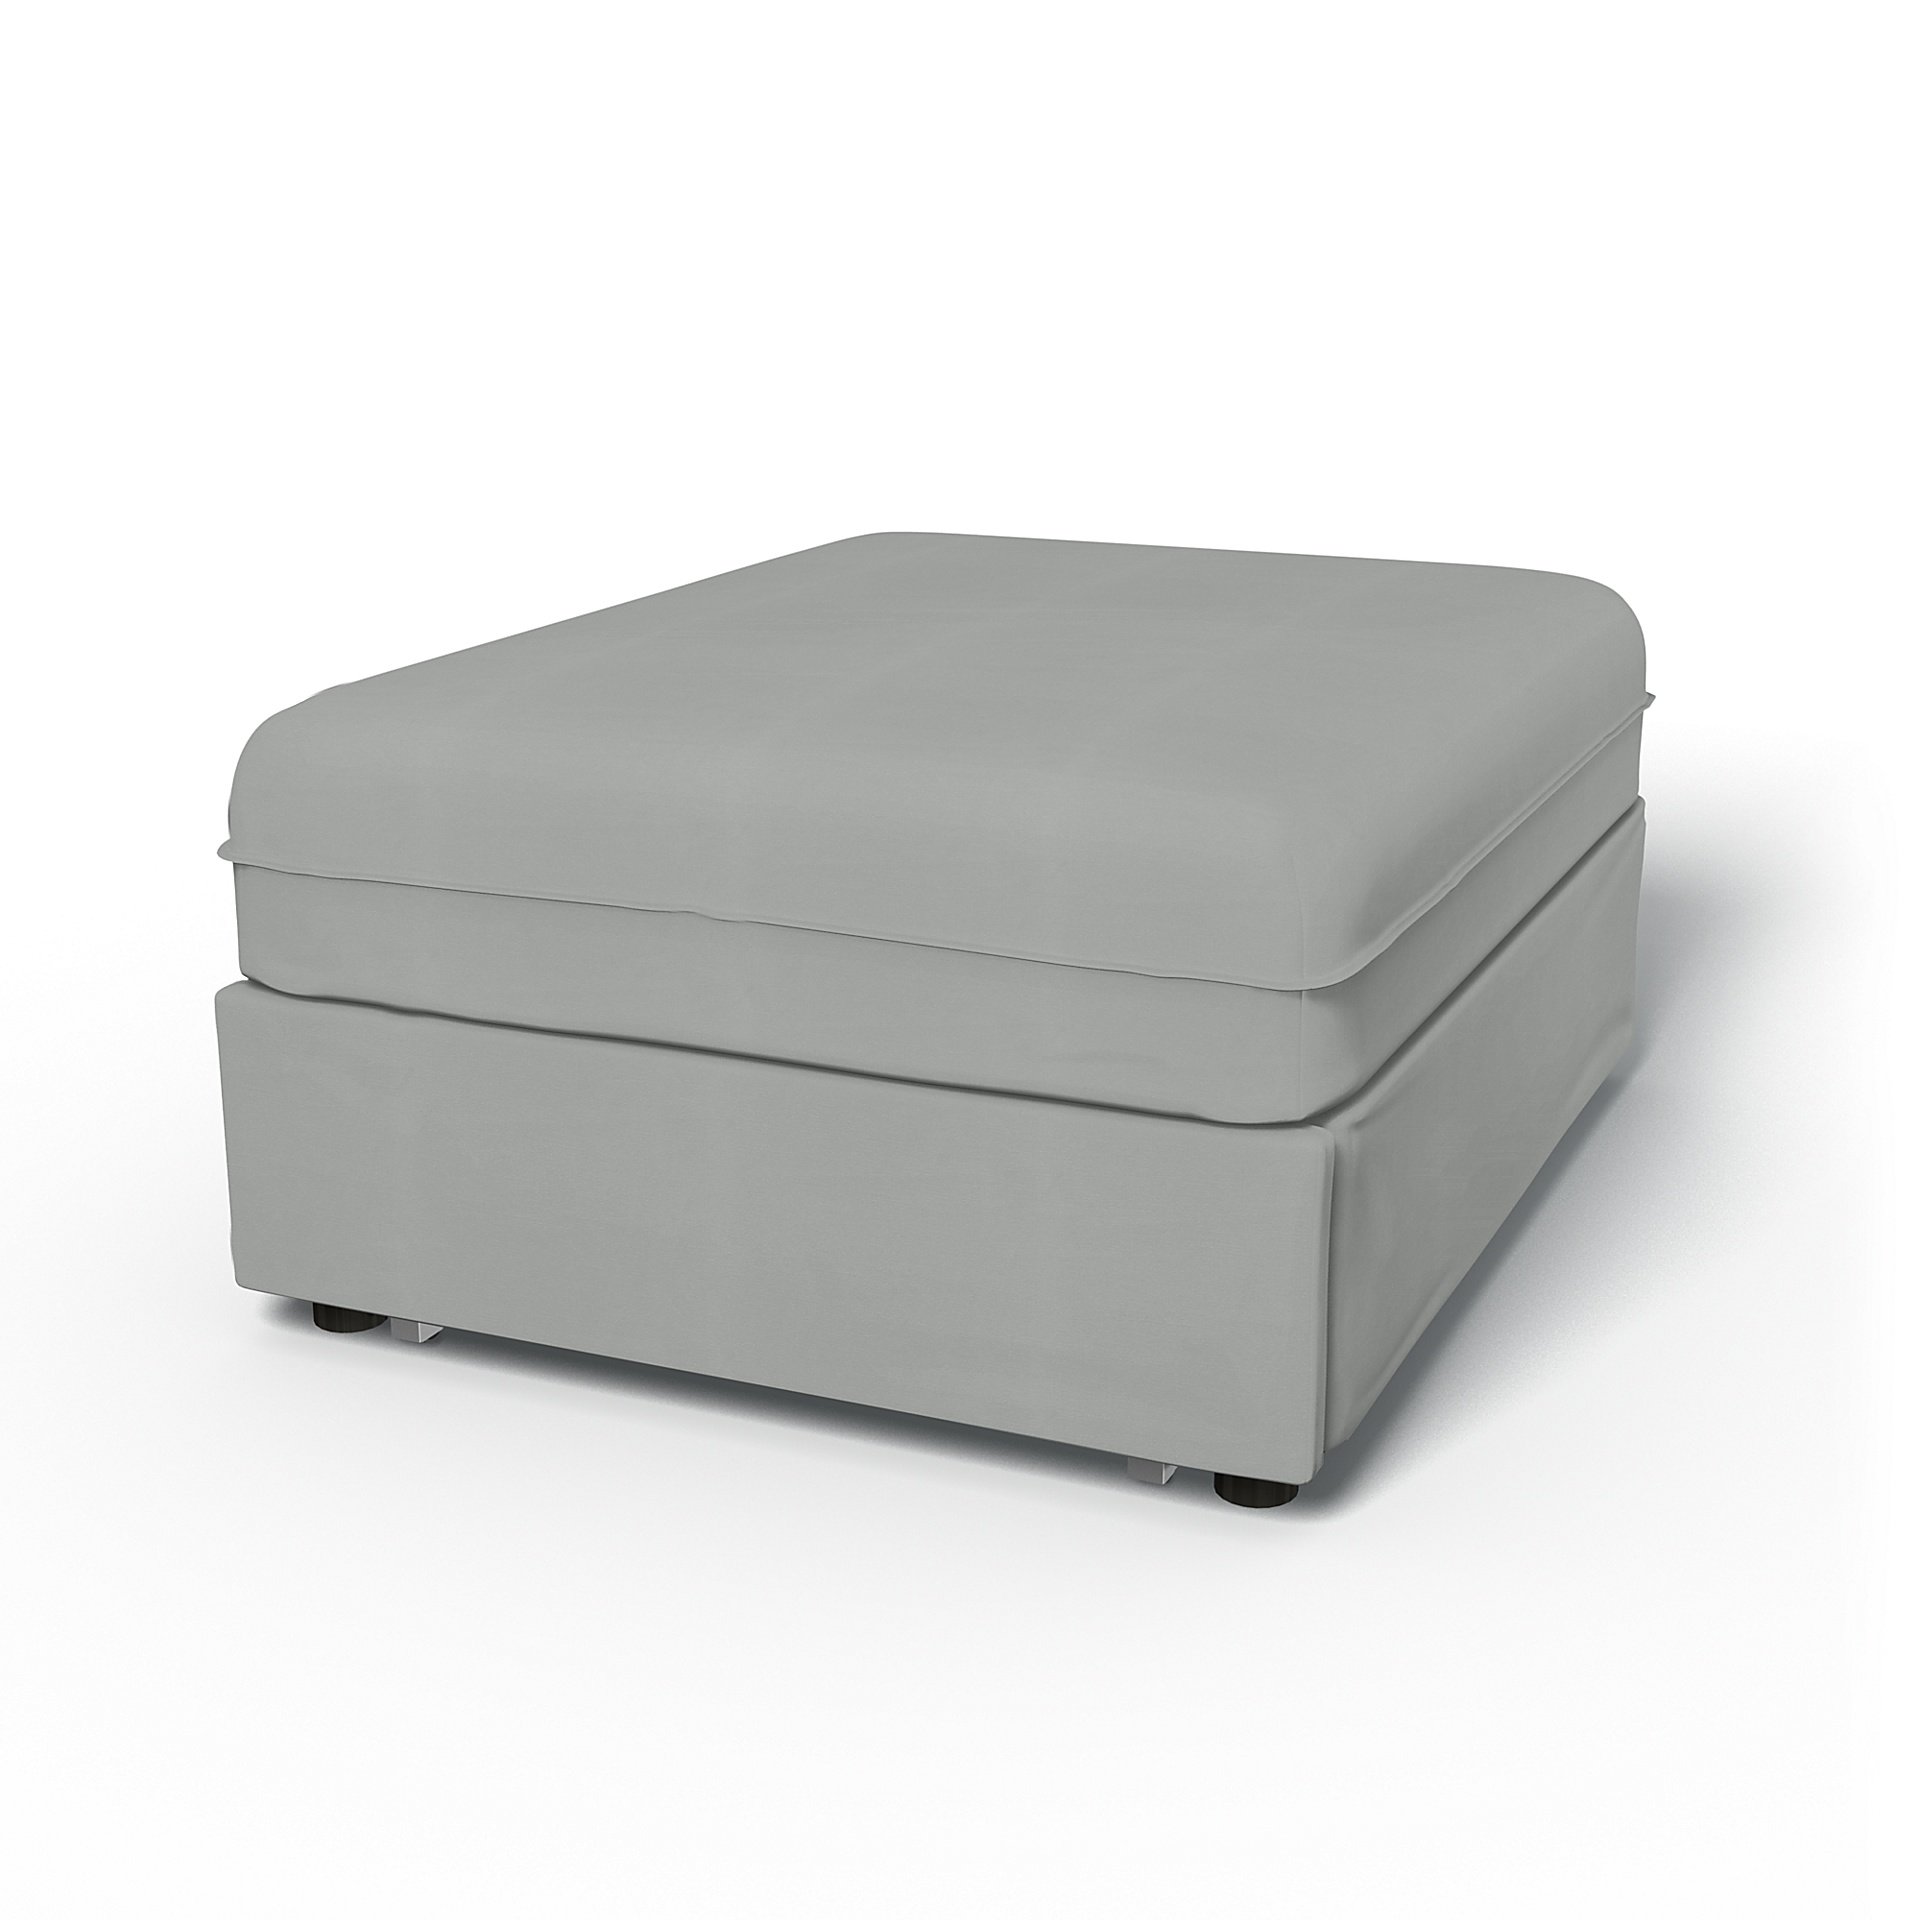 IKEA - Vallentuna Seat Module with Sofa Bed Cover 80x100cm 32x39in, Silver Grey, Cotton - Bemz